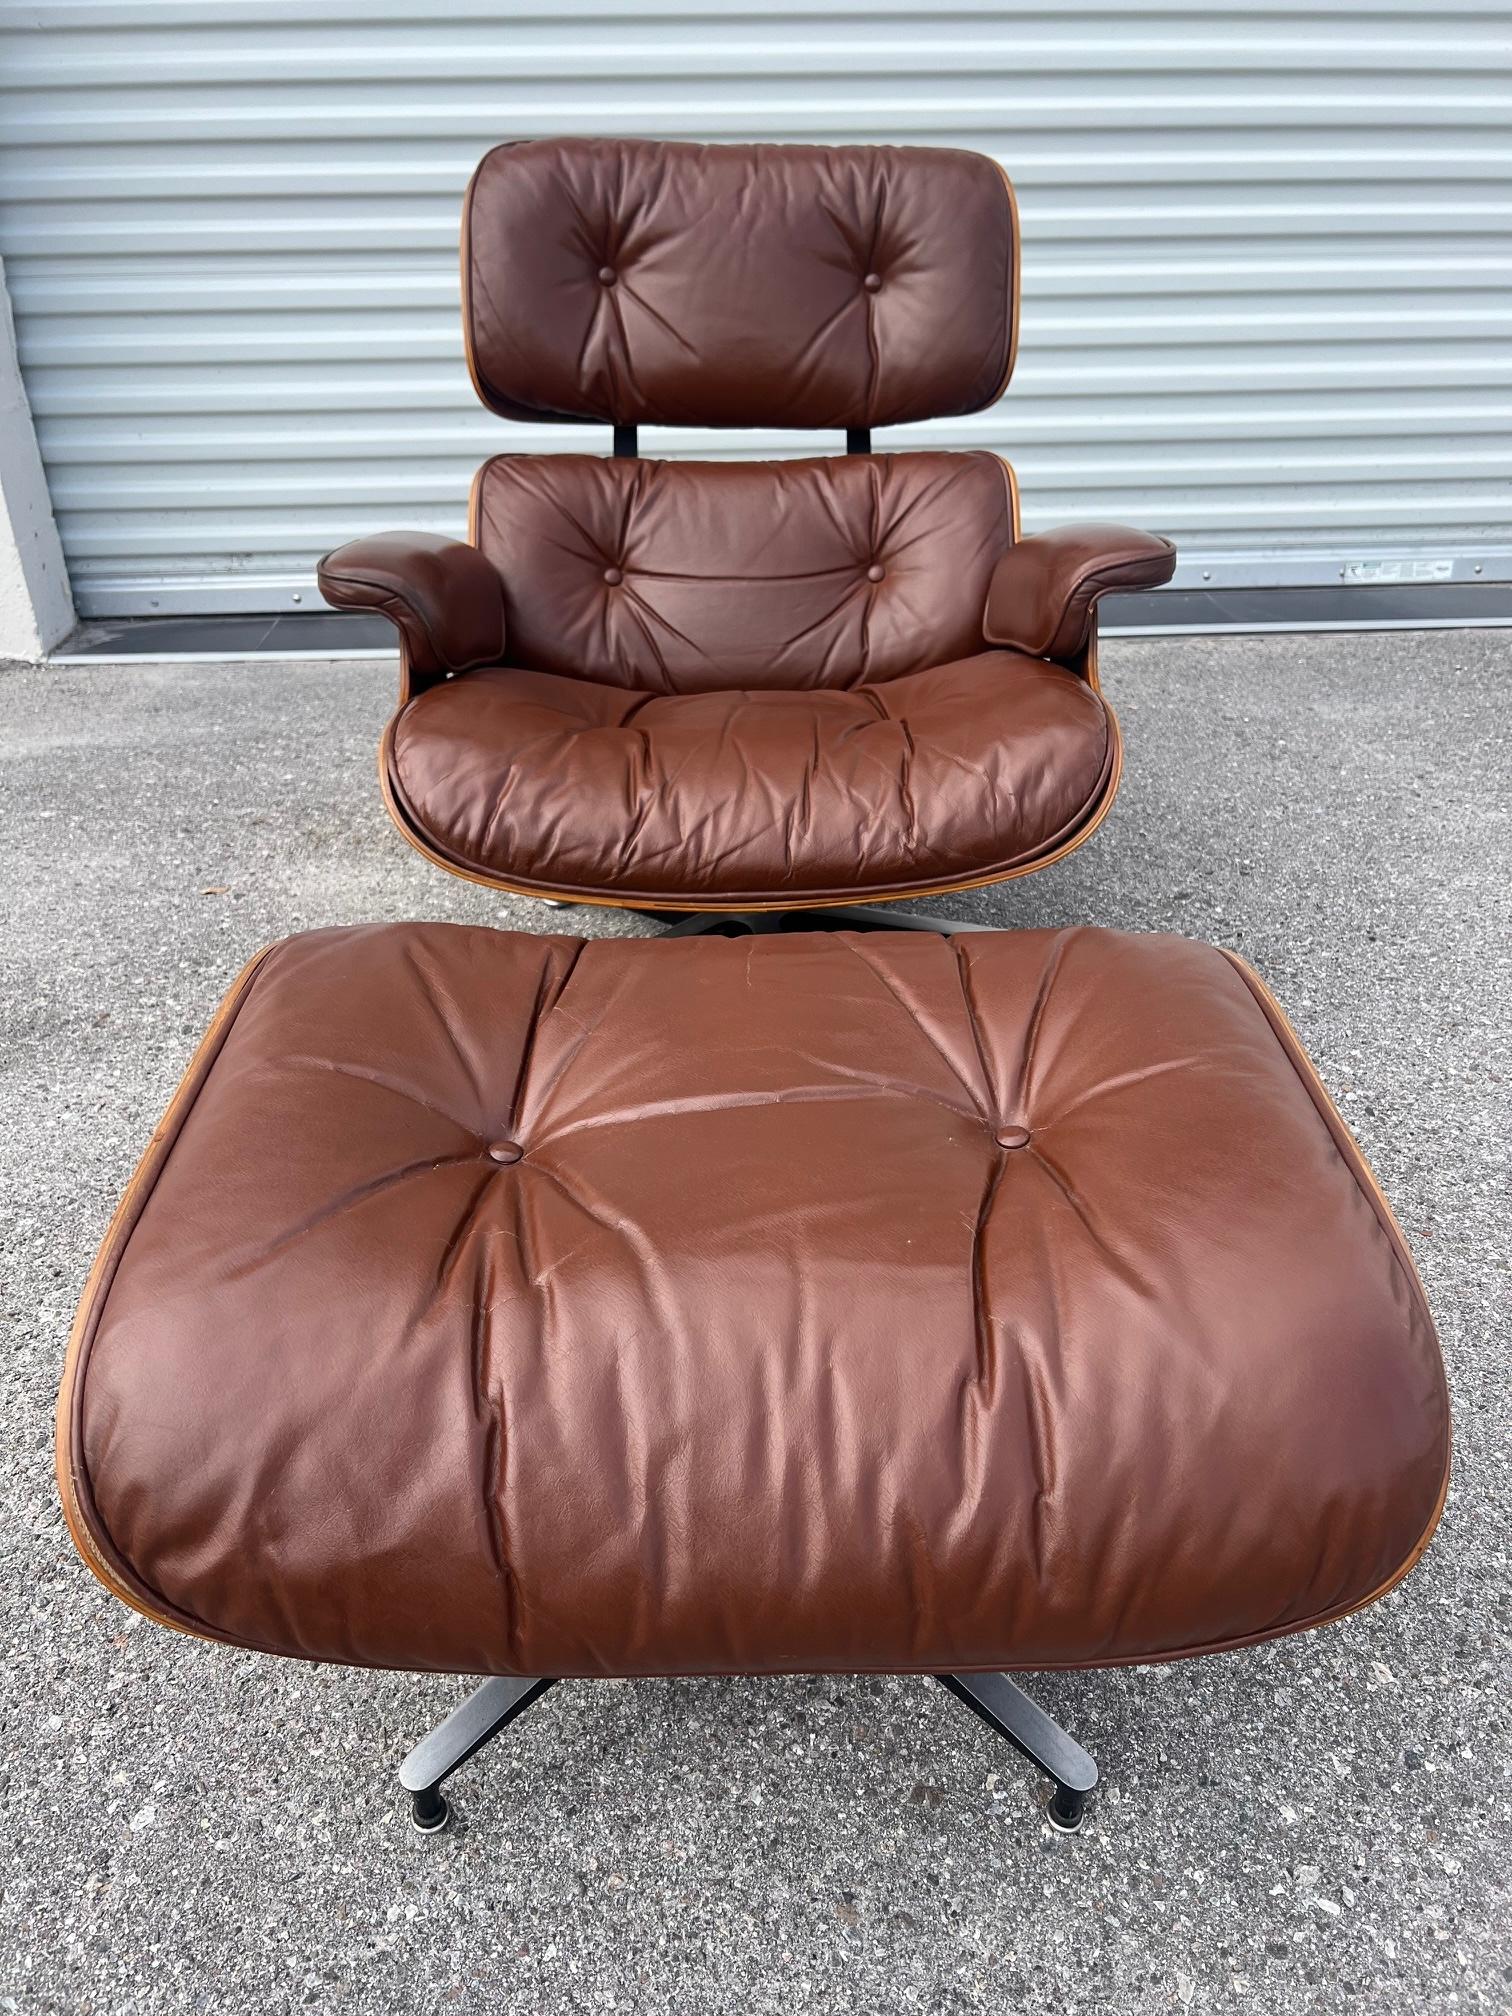  Classic Charles Eames Herman Miller Lounge Chair 1970's Cognac Brown Leather For Sale 2